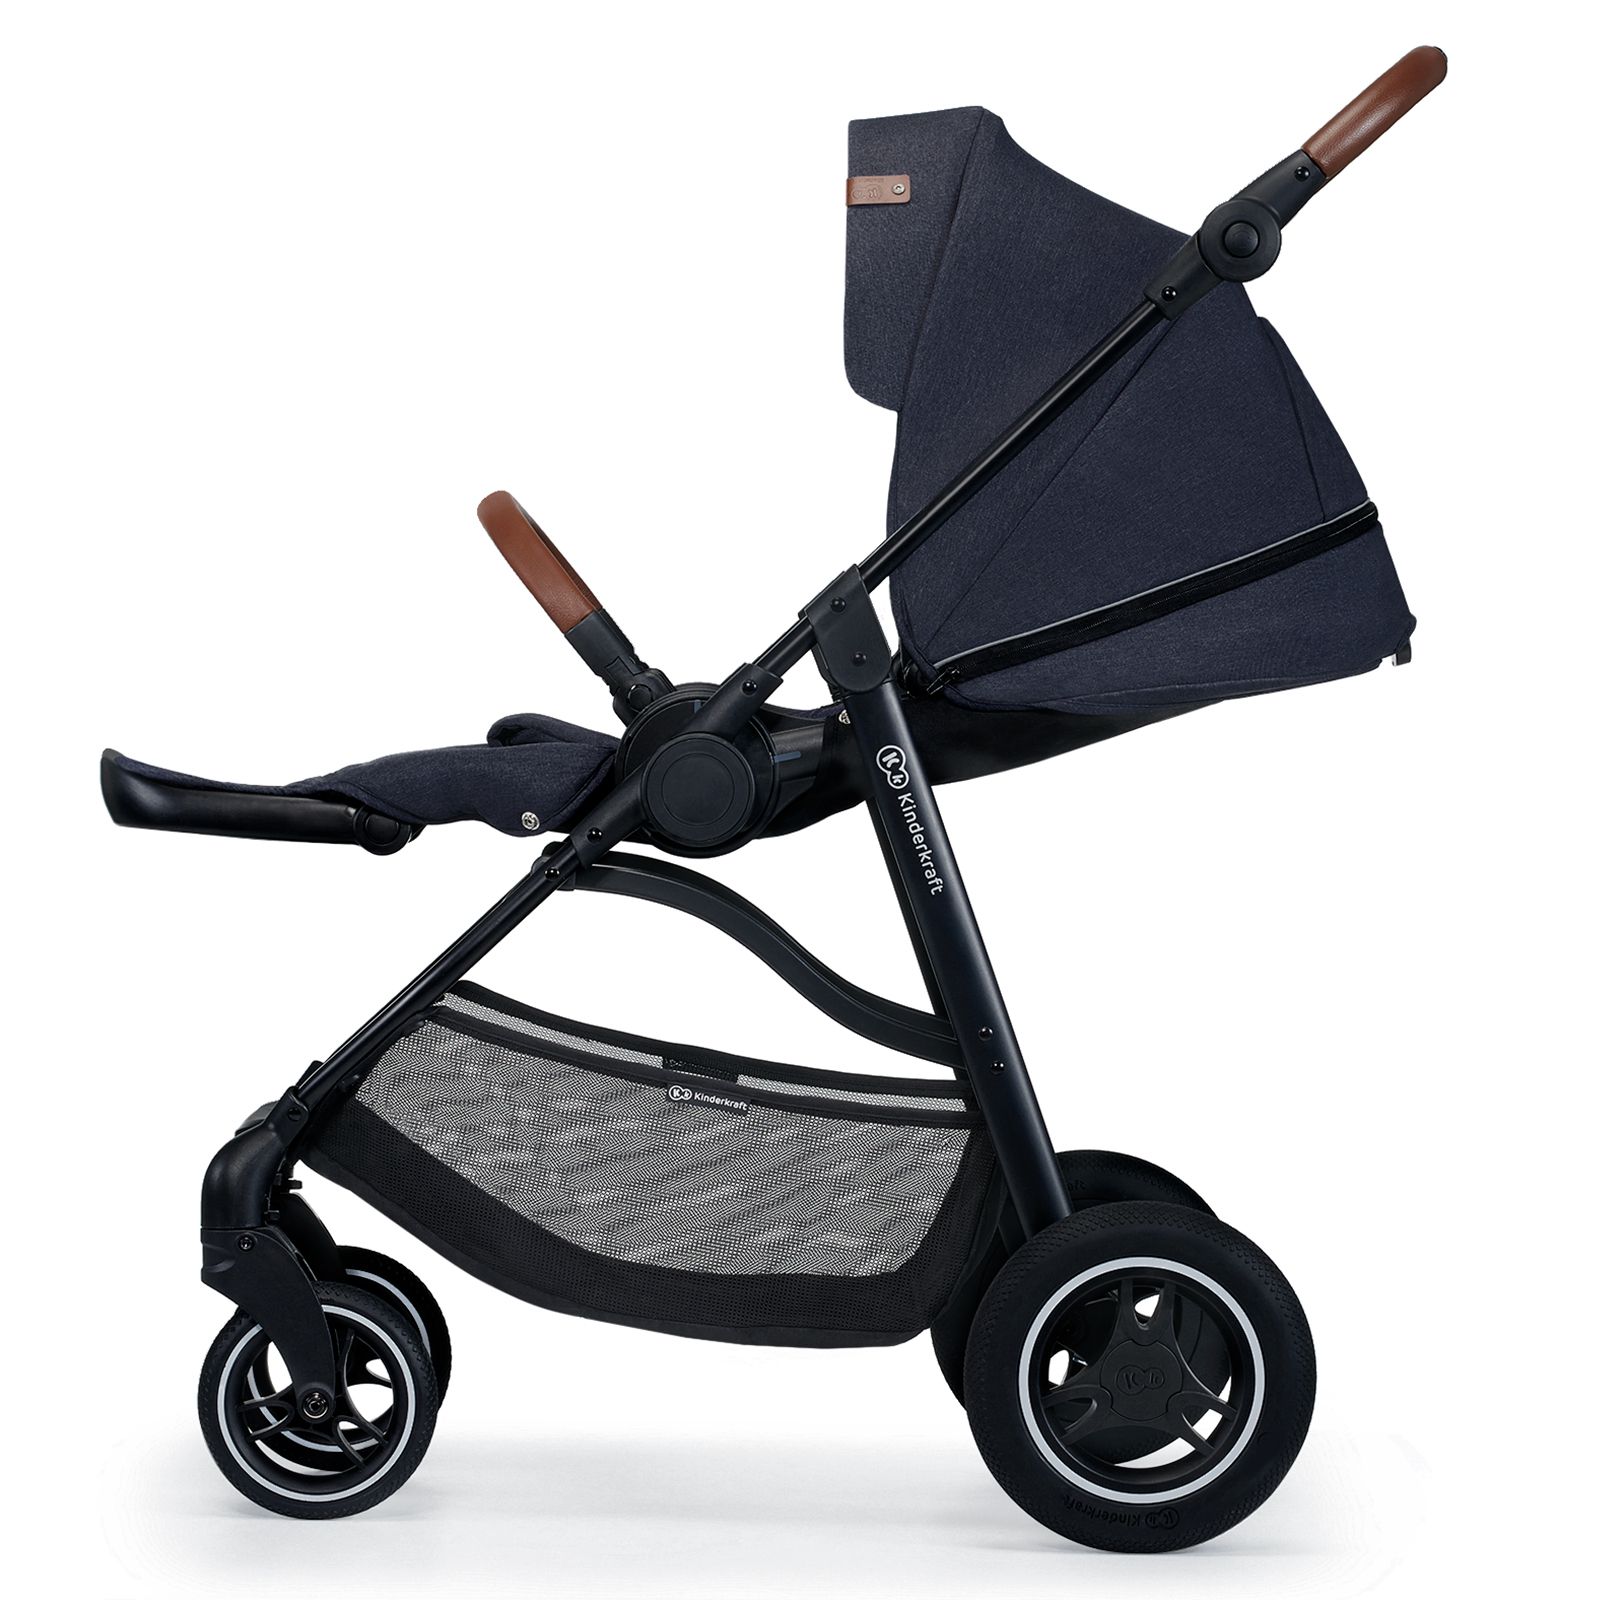 Stroller with a lie-flat function